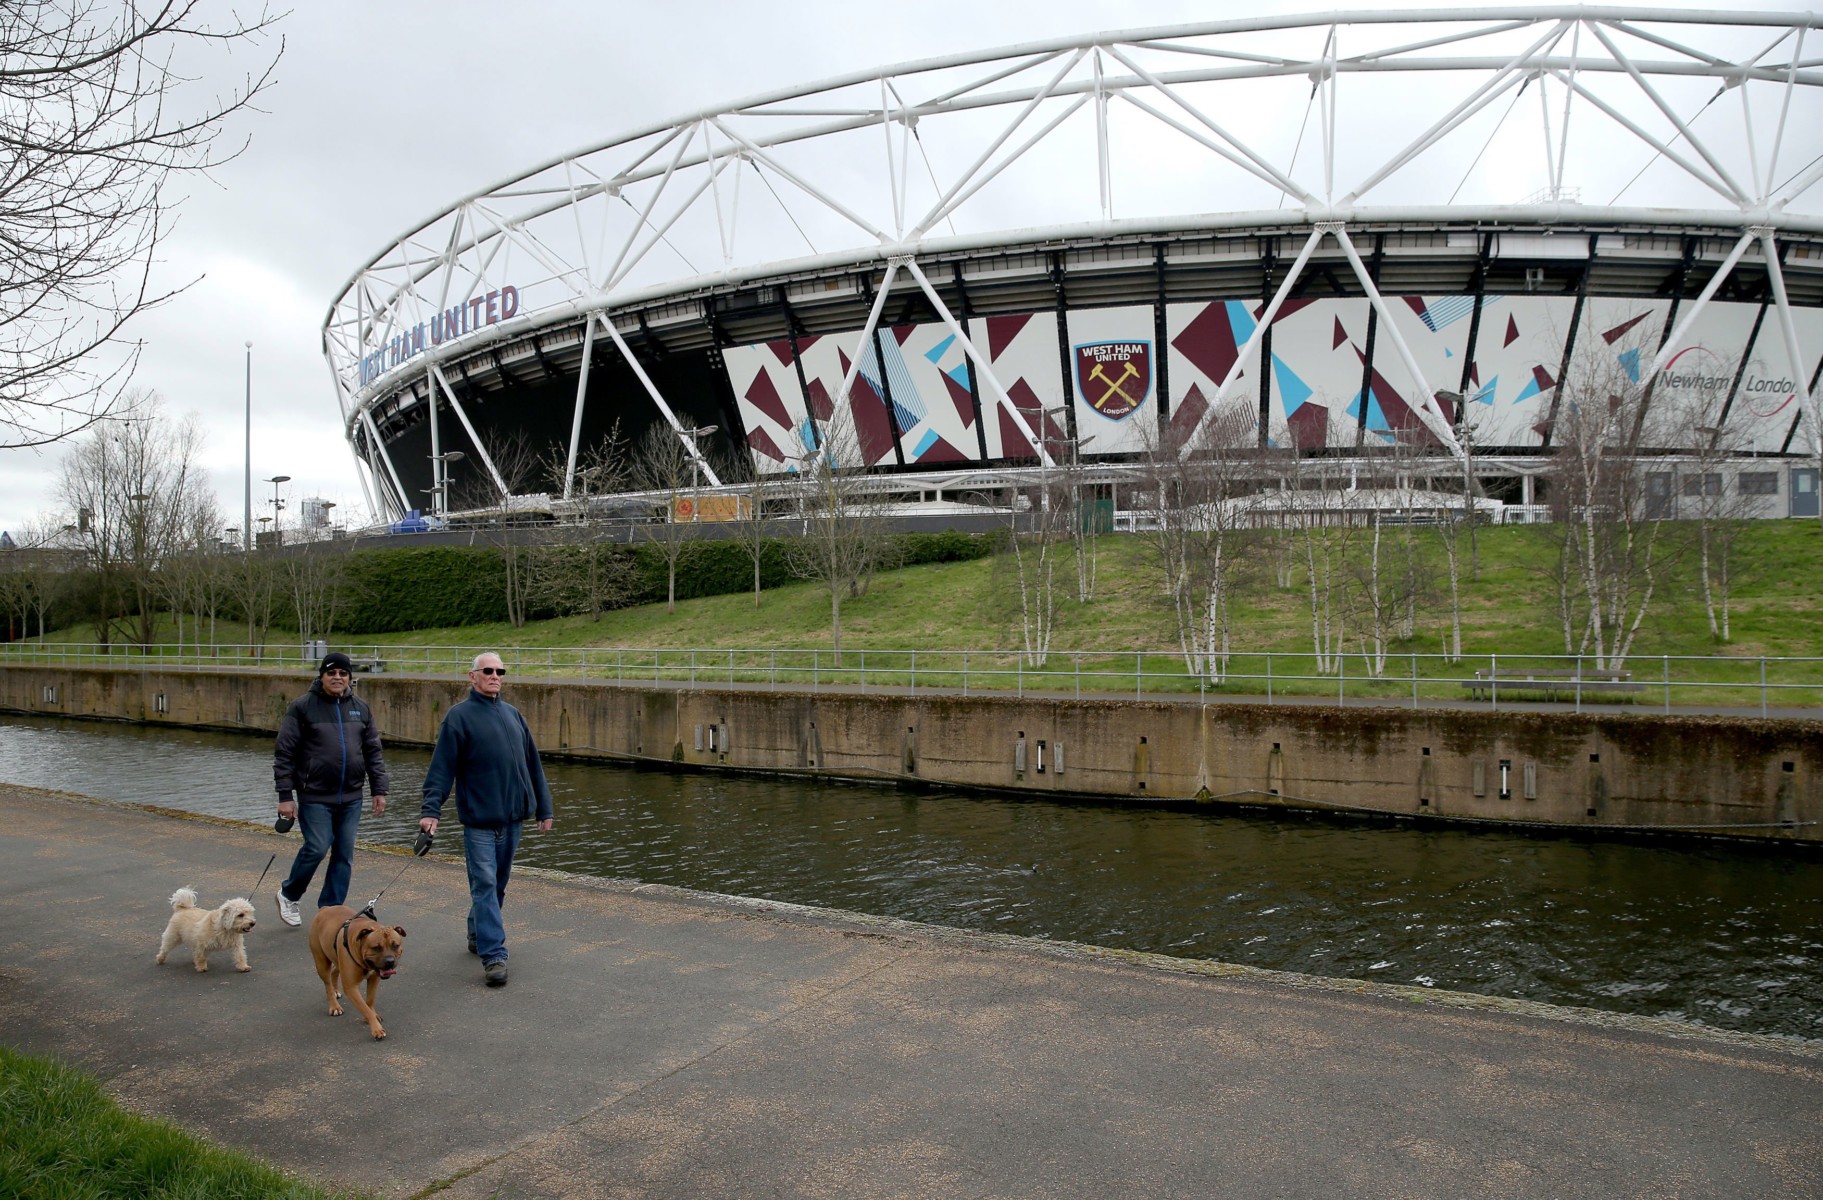 Football venue like West Ham's London Stadium can't continue to stay shut without sever effects for their clubs, unless pay cuts are agreed